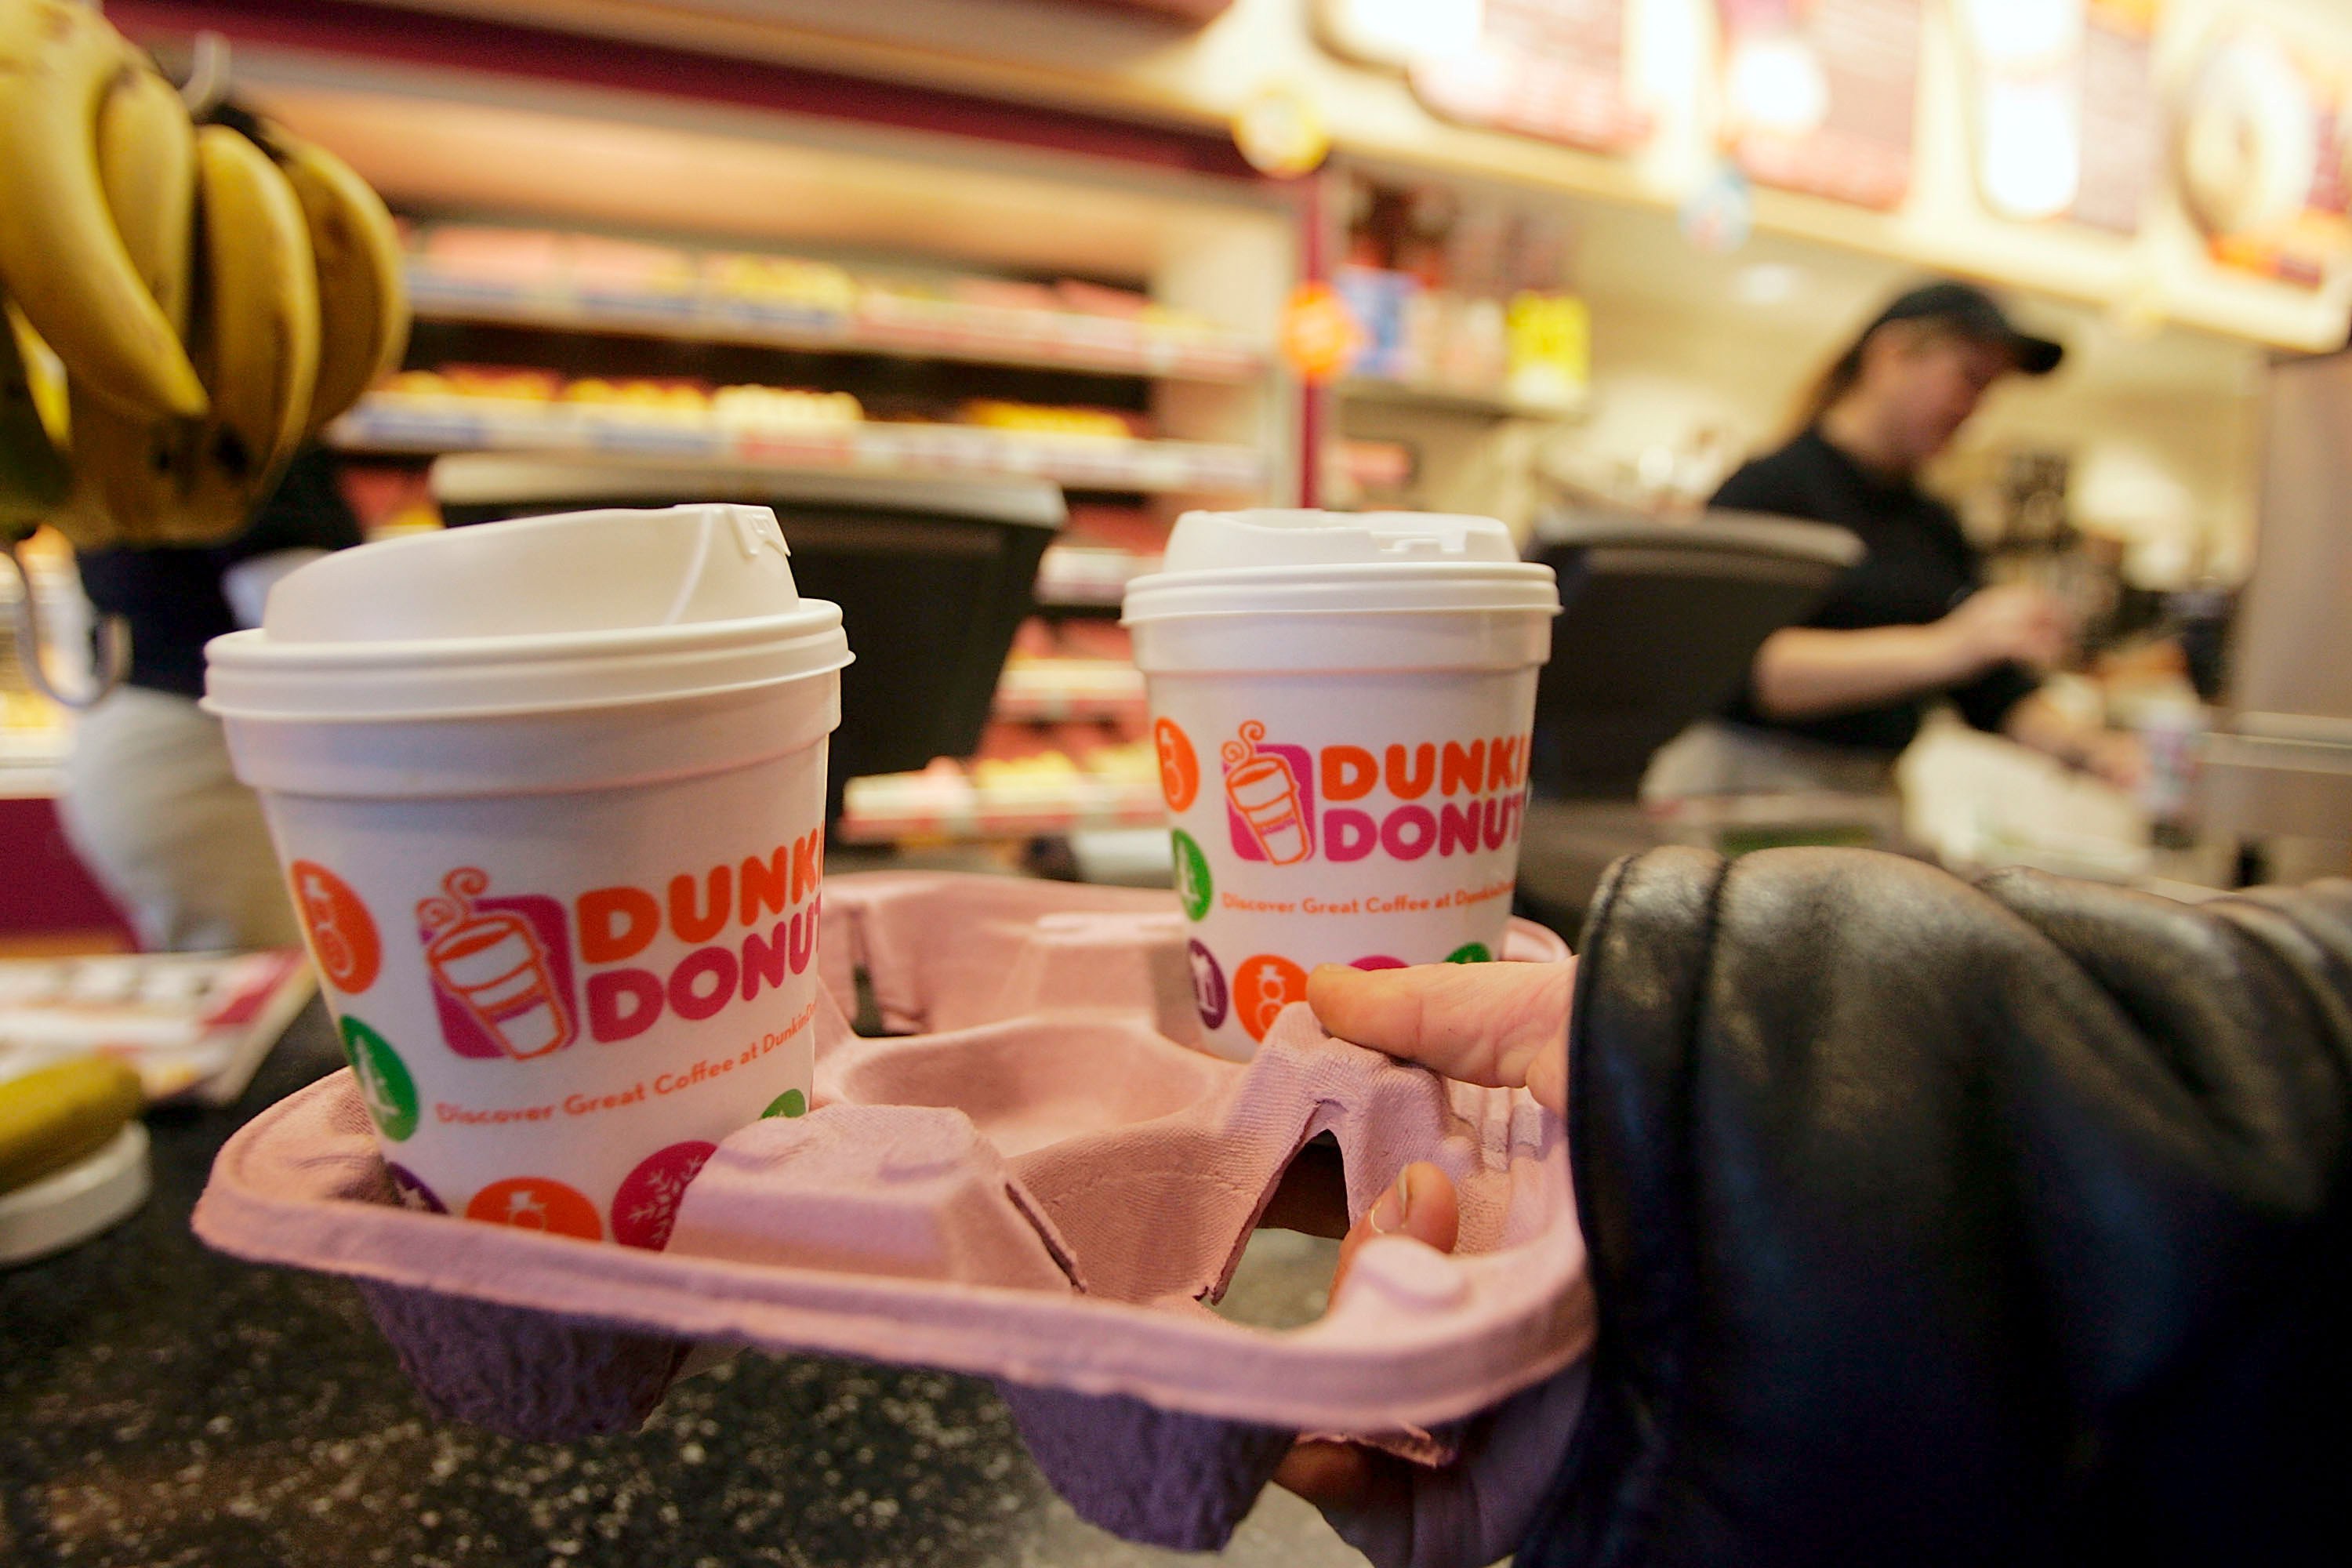 Dunkin' Donuts hints at possible on-demand food delivery test. (Joe Raedle—Getty Images)